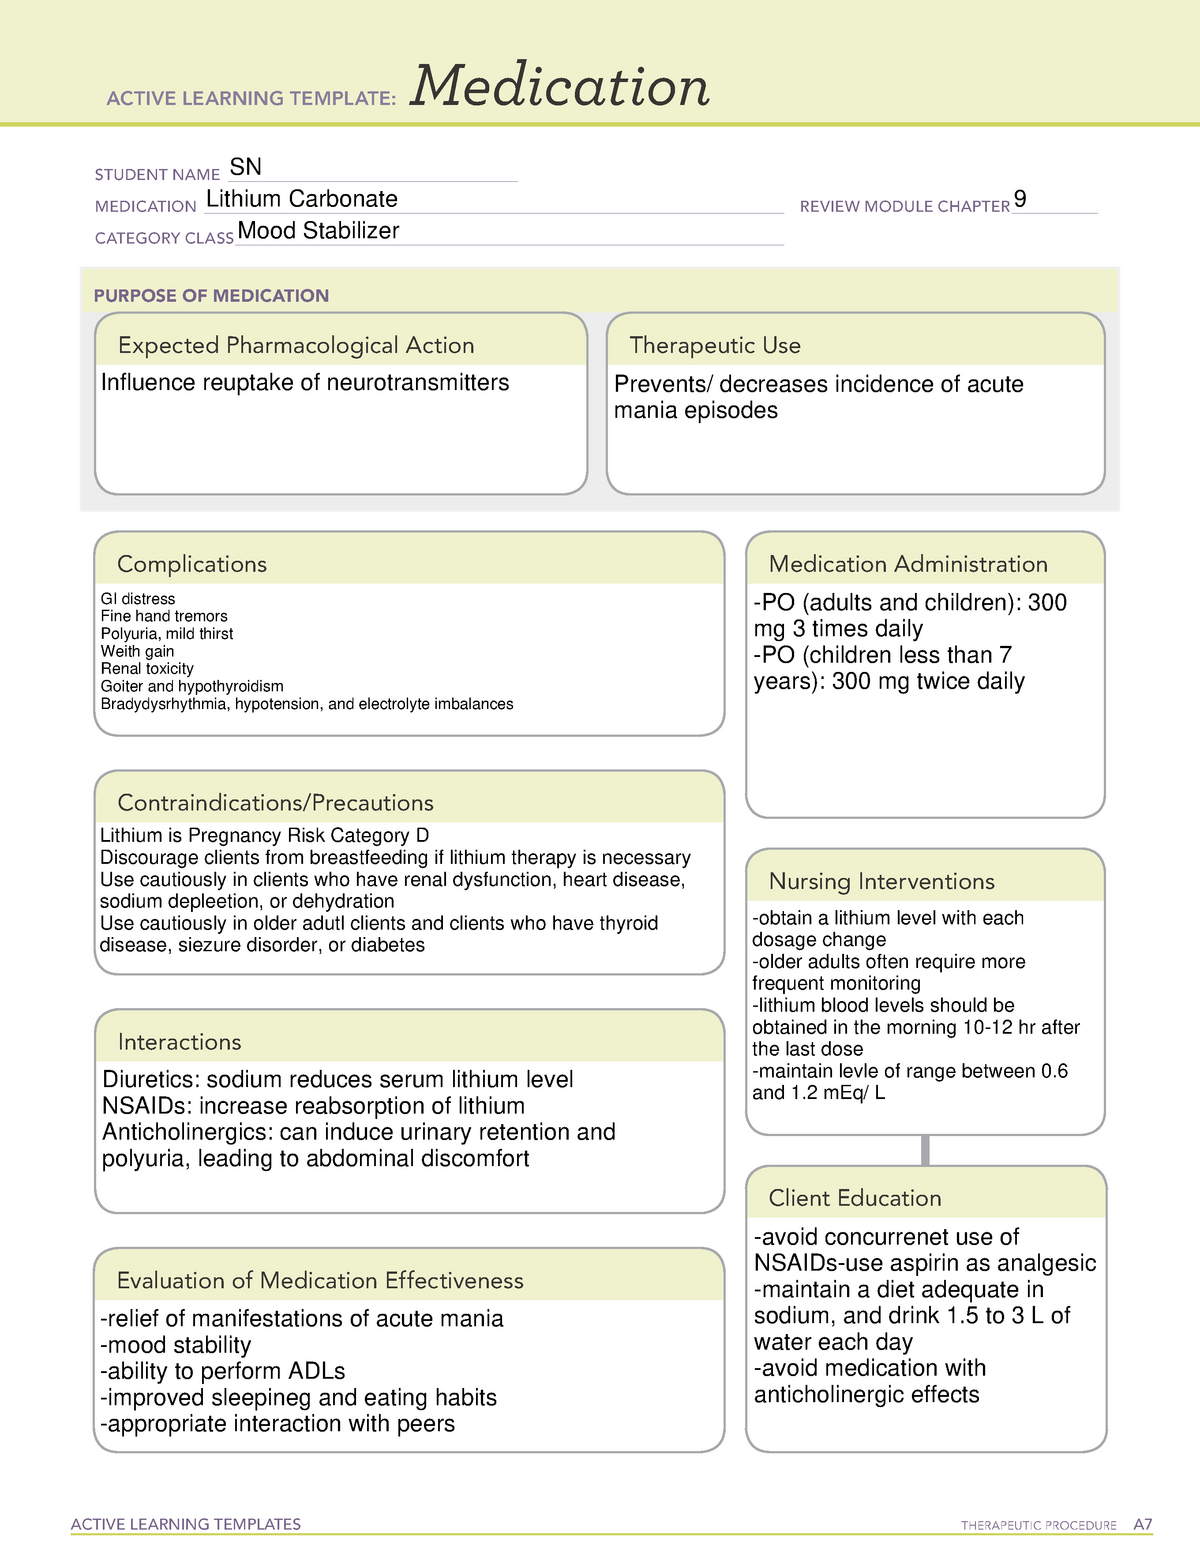 active-learning-template-medication-active-learning-templates-therapeutic-procedure-a